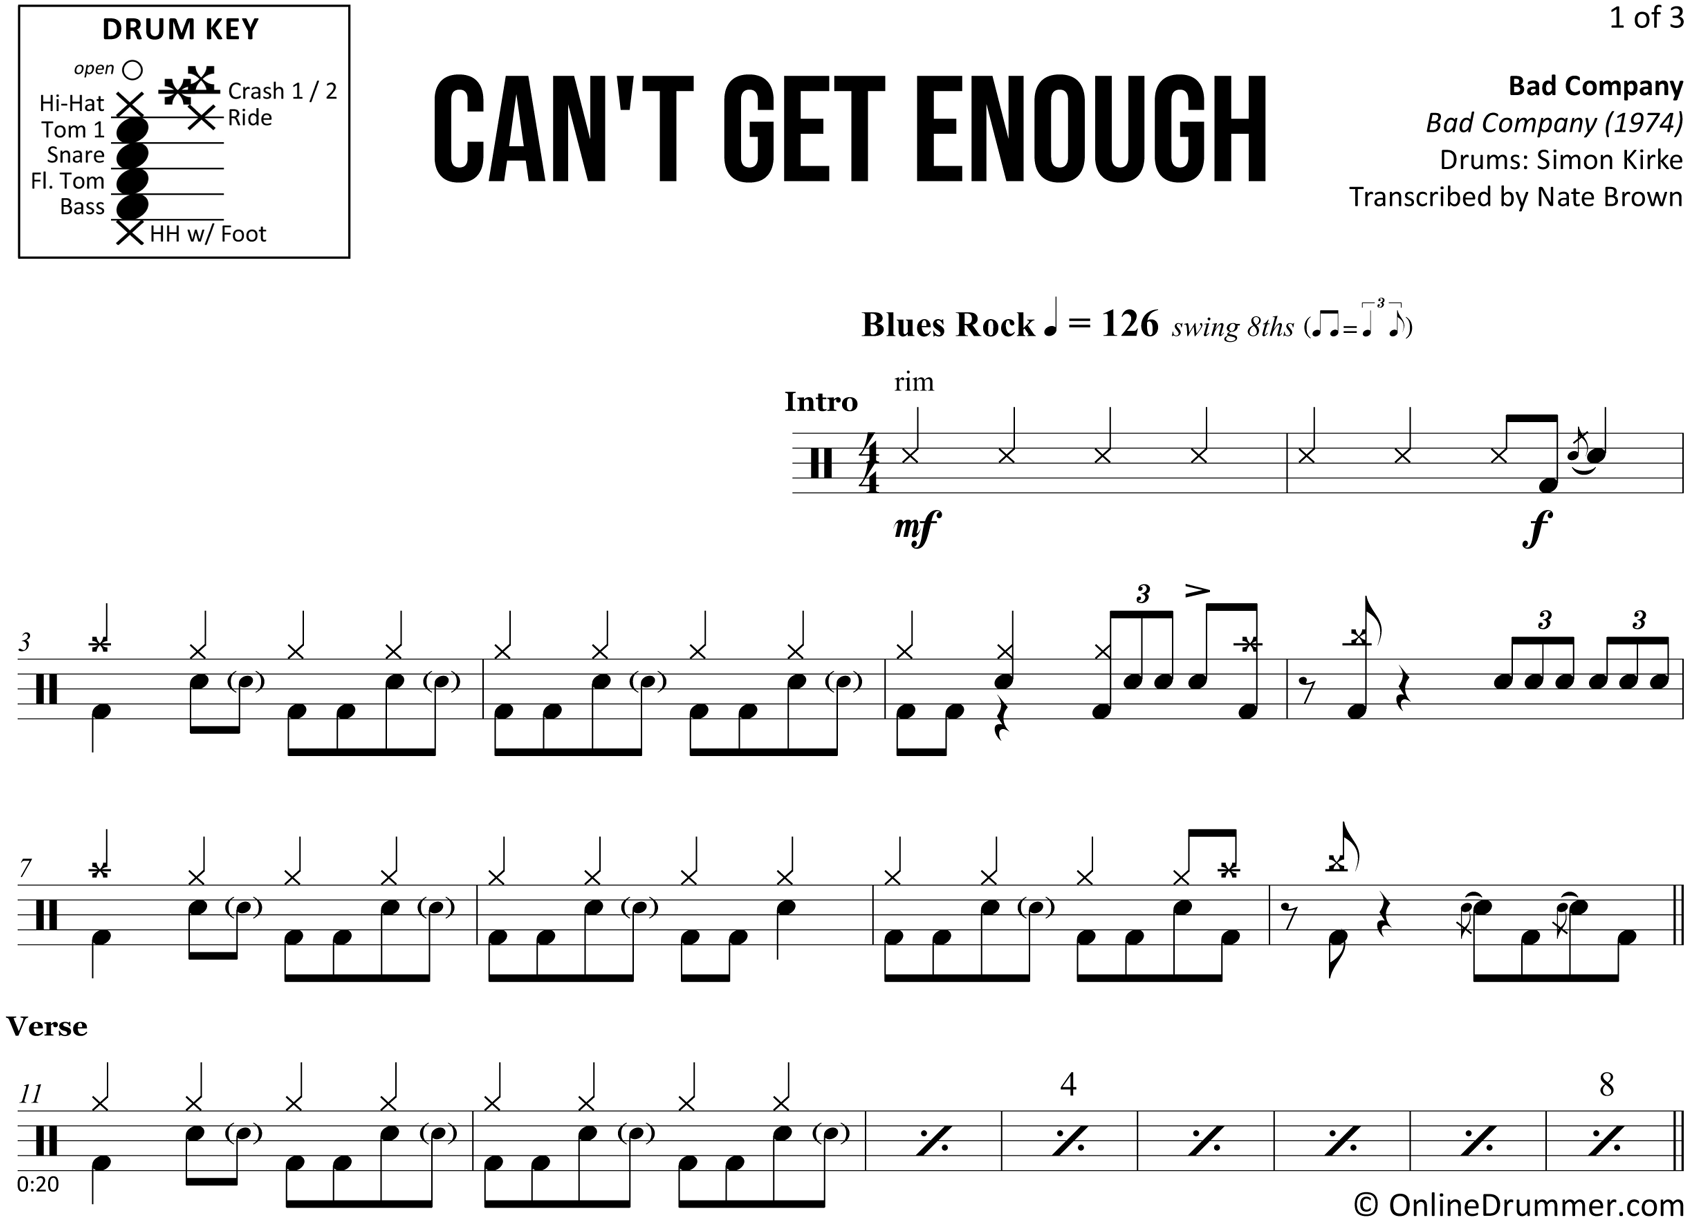 Can't Get Enough - Bad Company - Drum Sheet Music